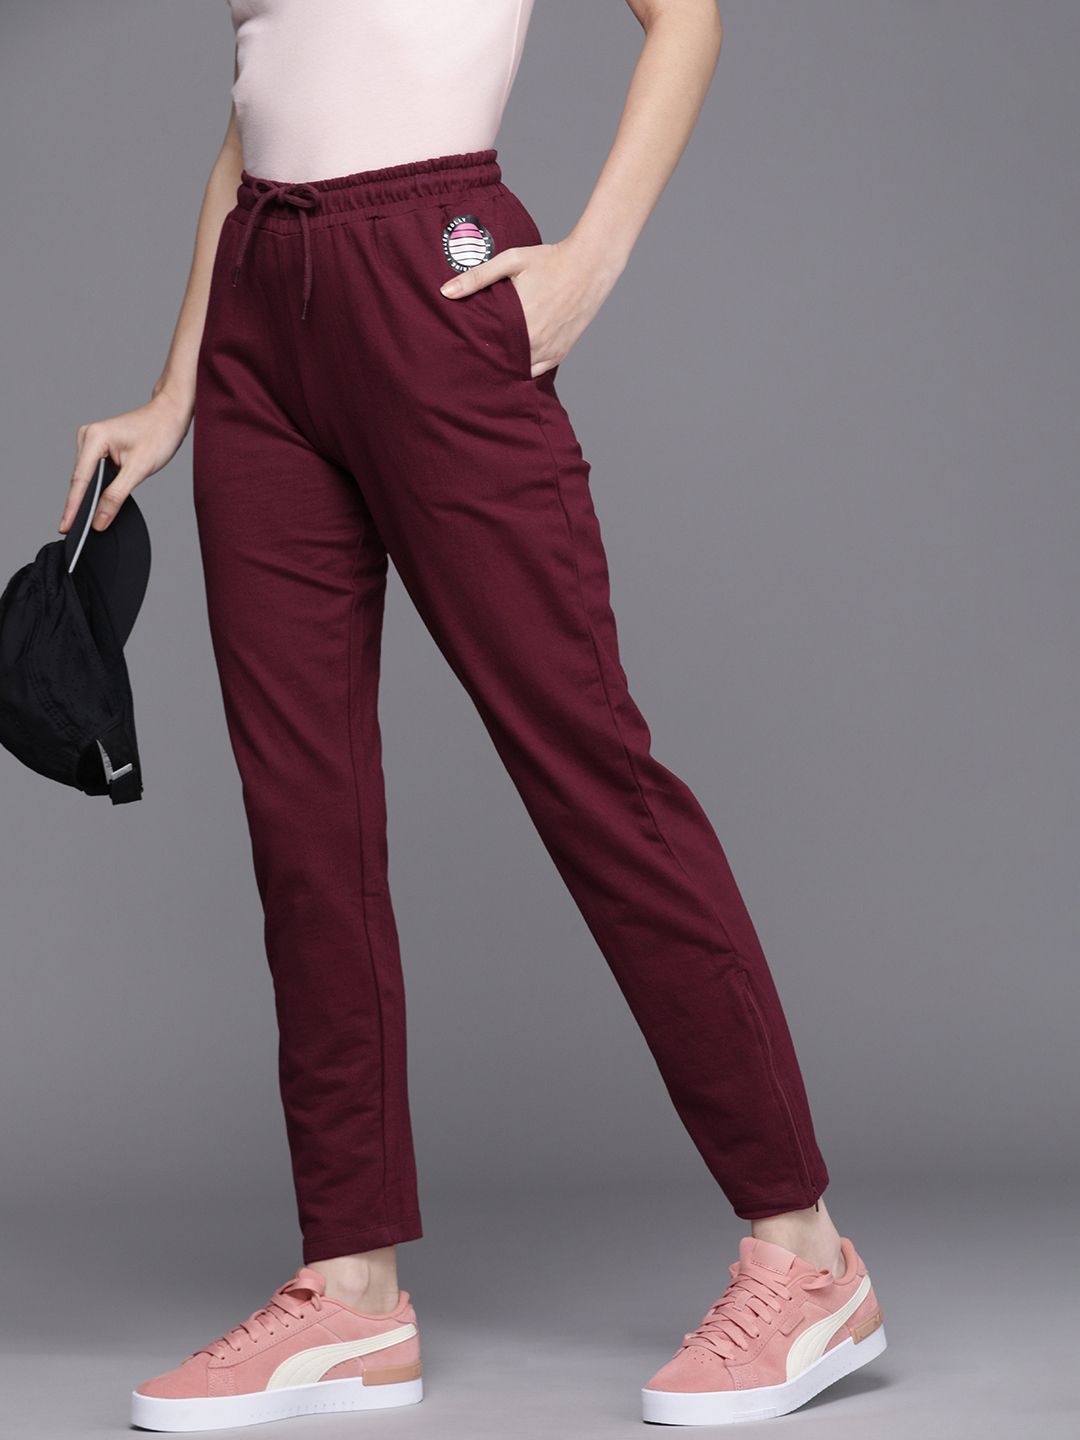 Allen Solly Woman Maroon Solid Pure Cotton Regular Fit Mid-Rise Trousers Price in India